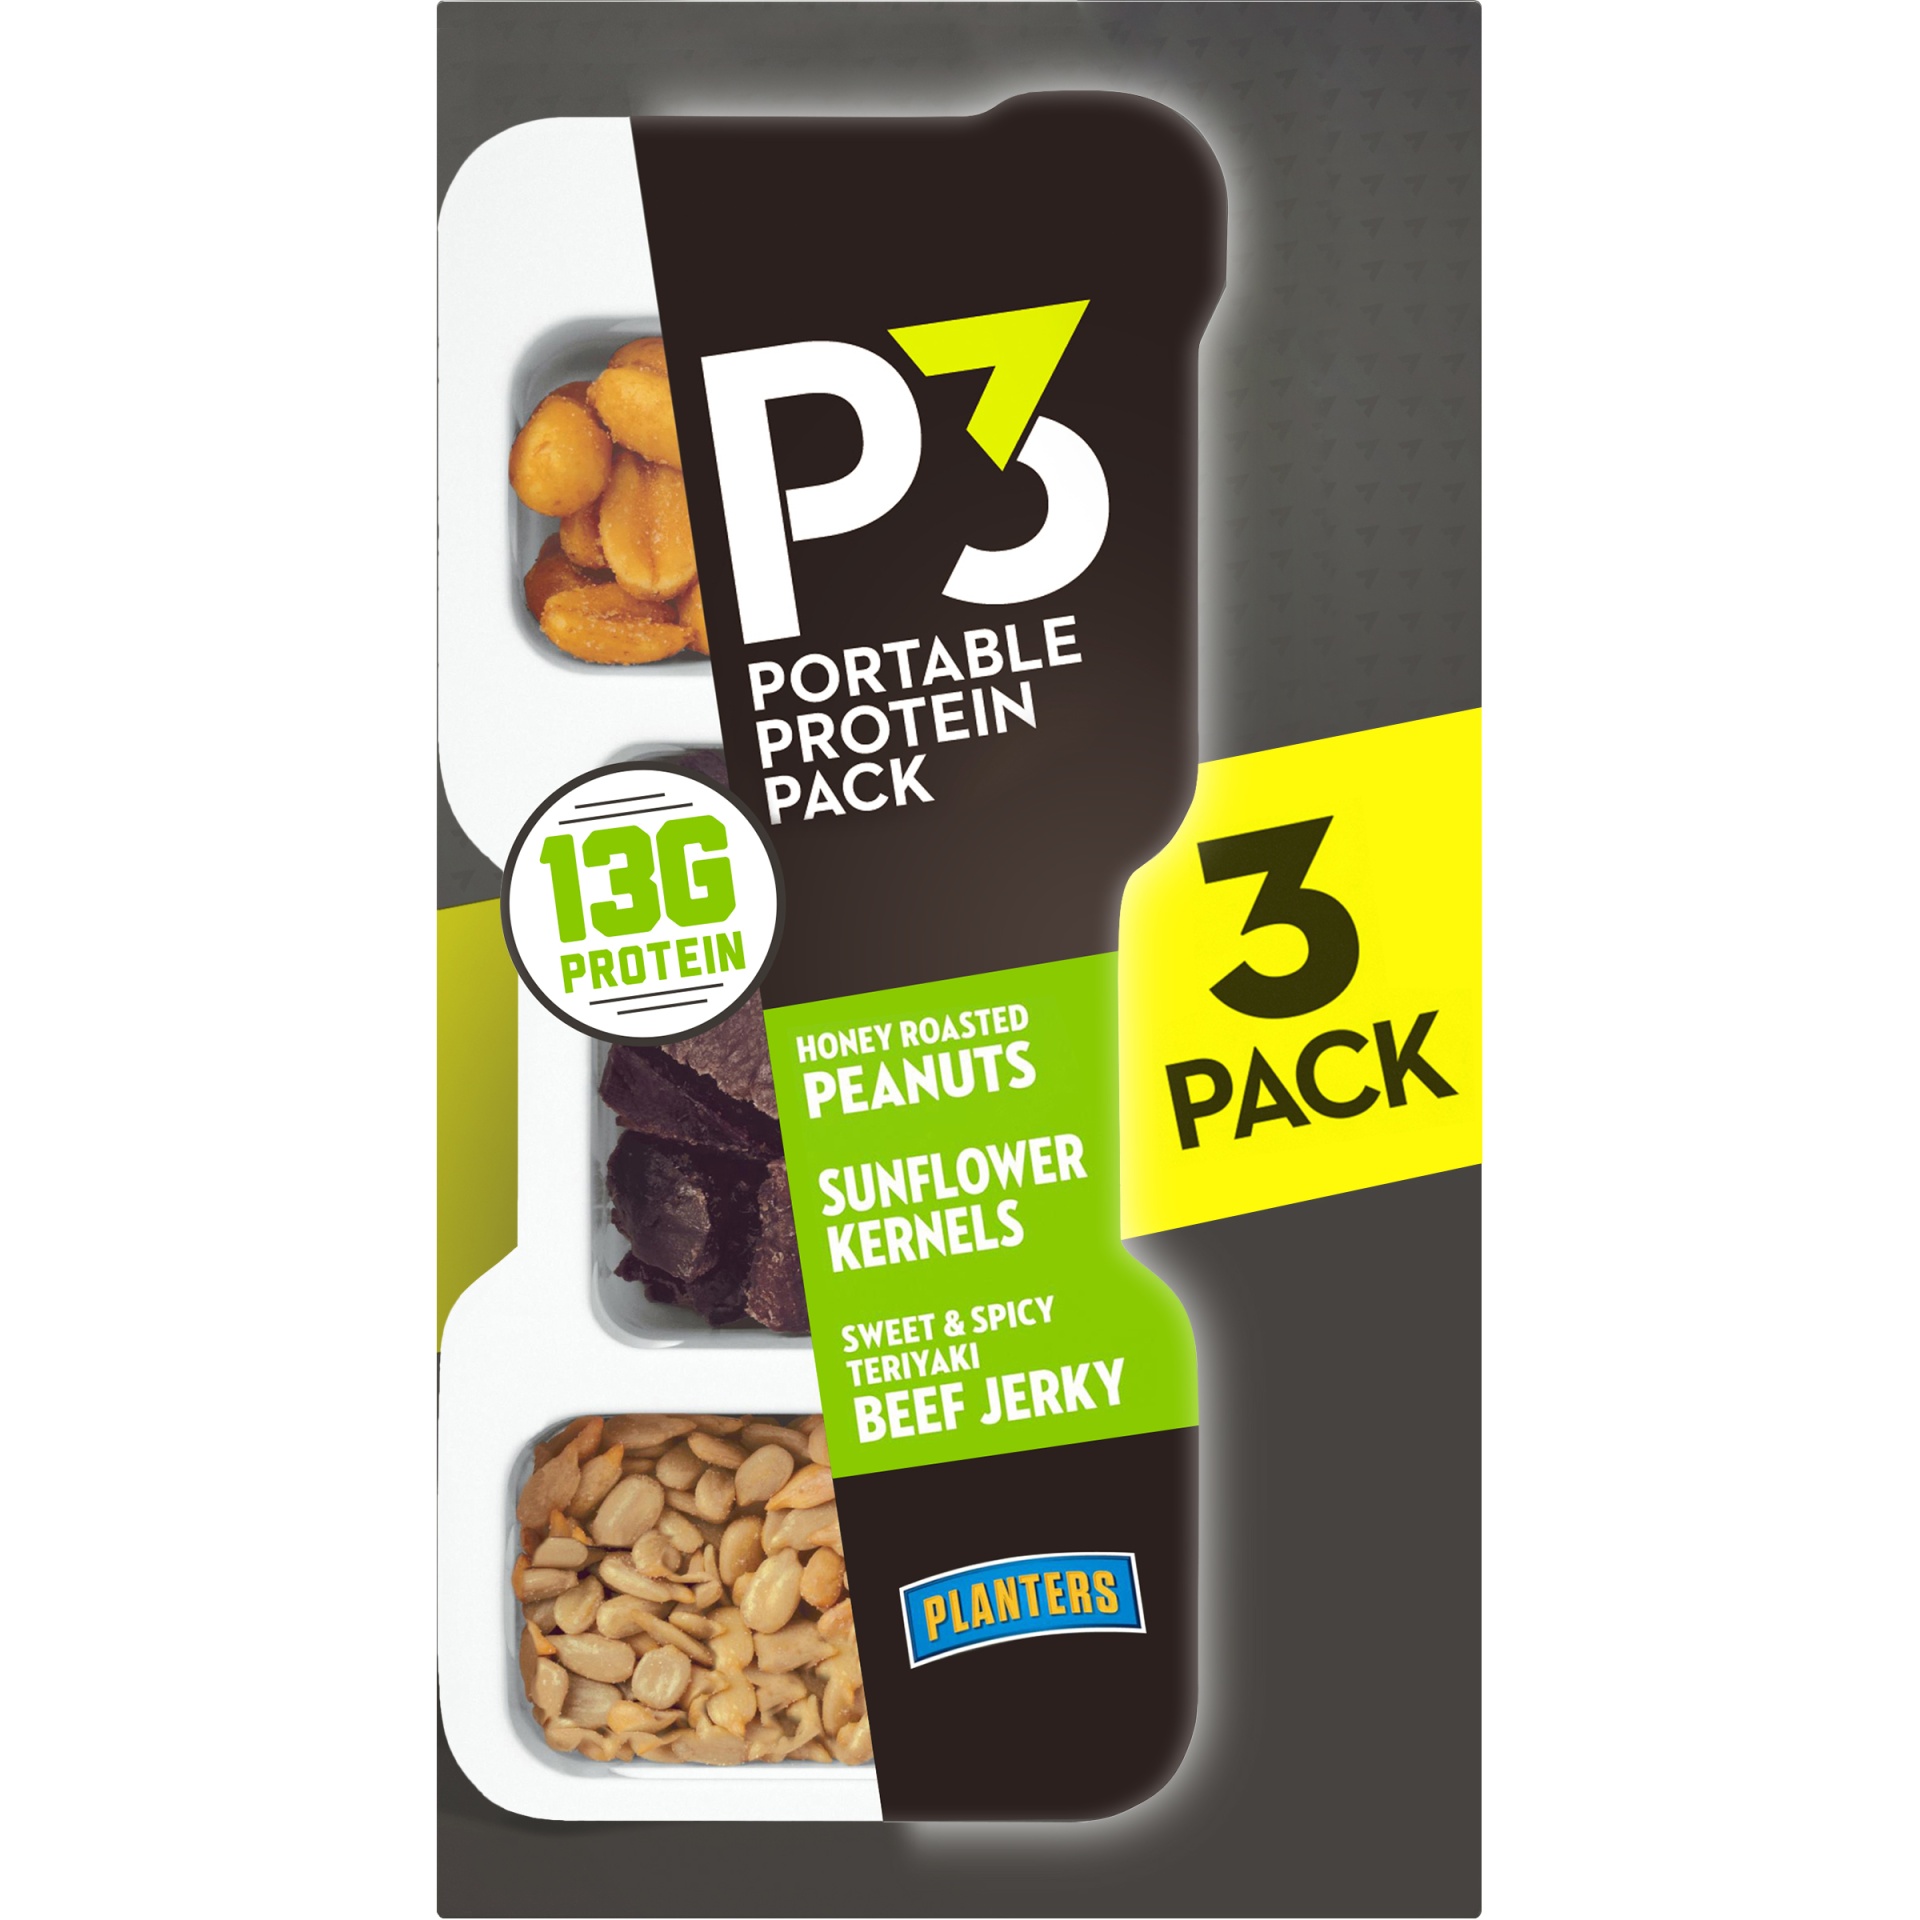 slide 1 of 8, P3 Portable Protein Snack Pack with Honey Roasted Peanuts, Sunflower Kernels & Teriyaki Beef Jerky Trays, 5.4 oz